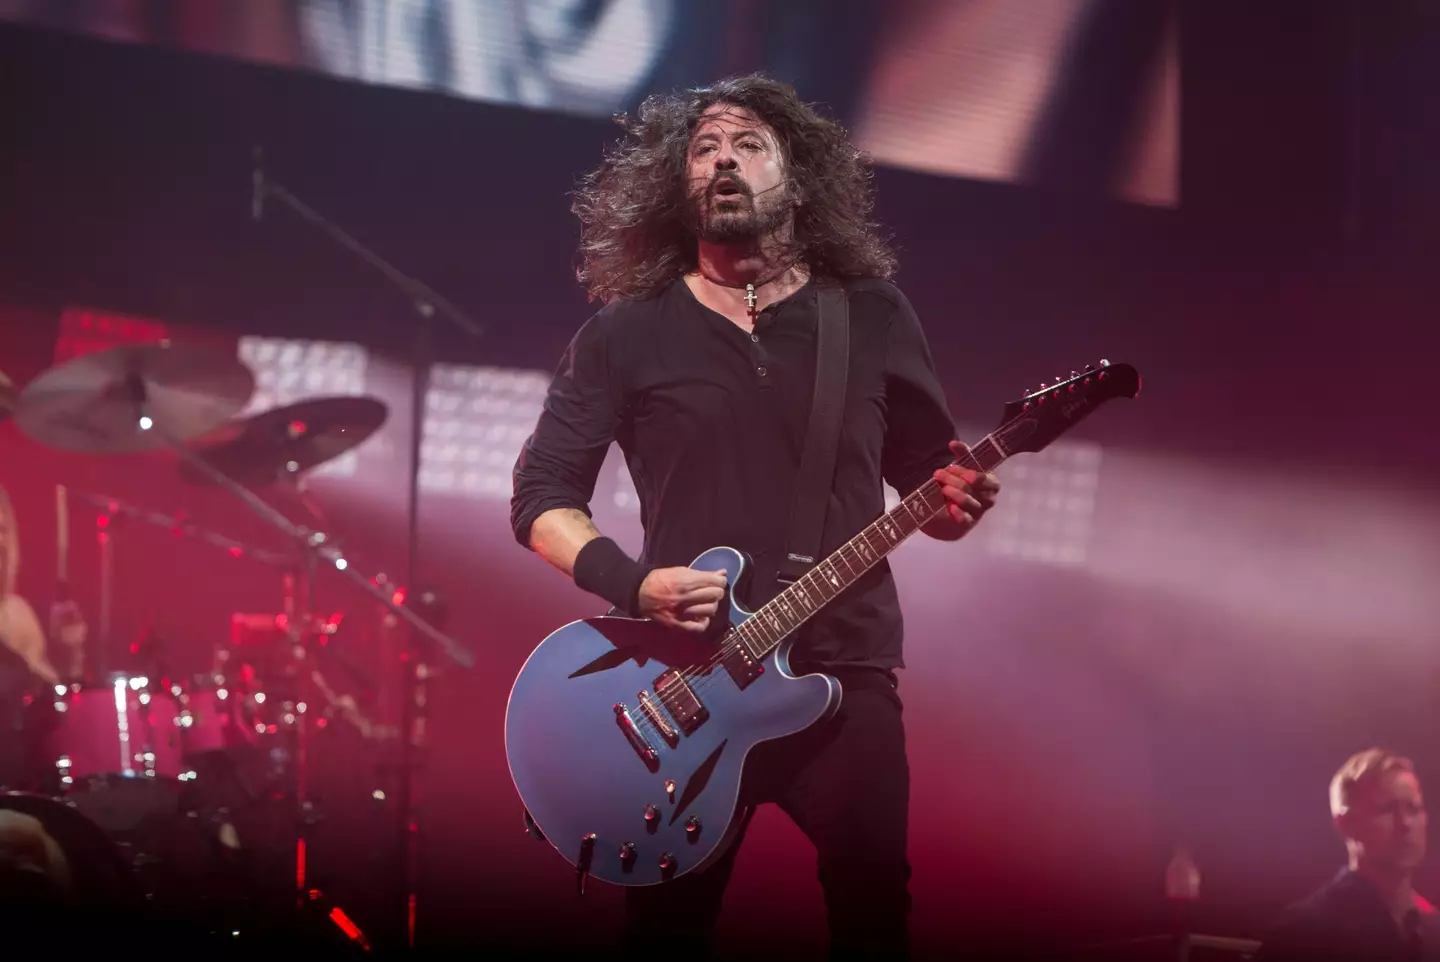 The Foo Fighters headlined back in 2017.